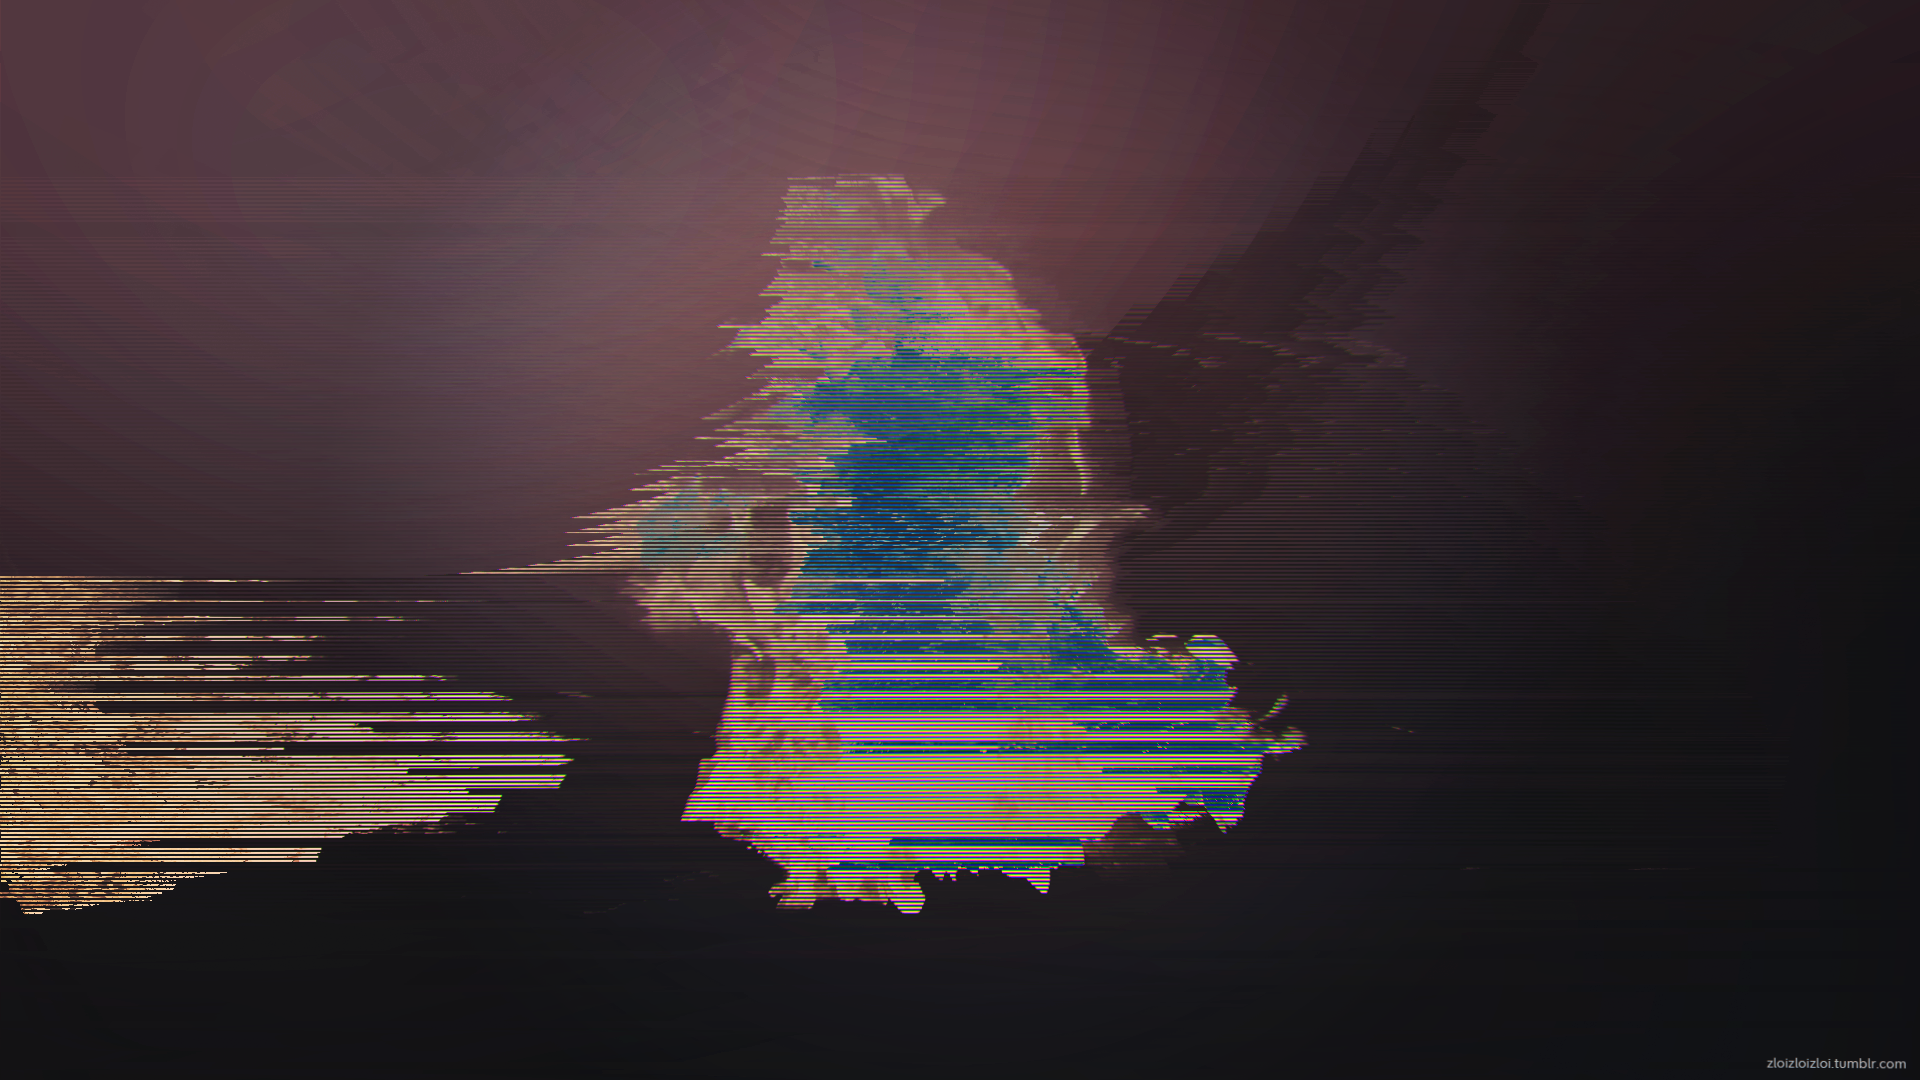 General 1920x1080 glitch art fire abstract